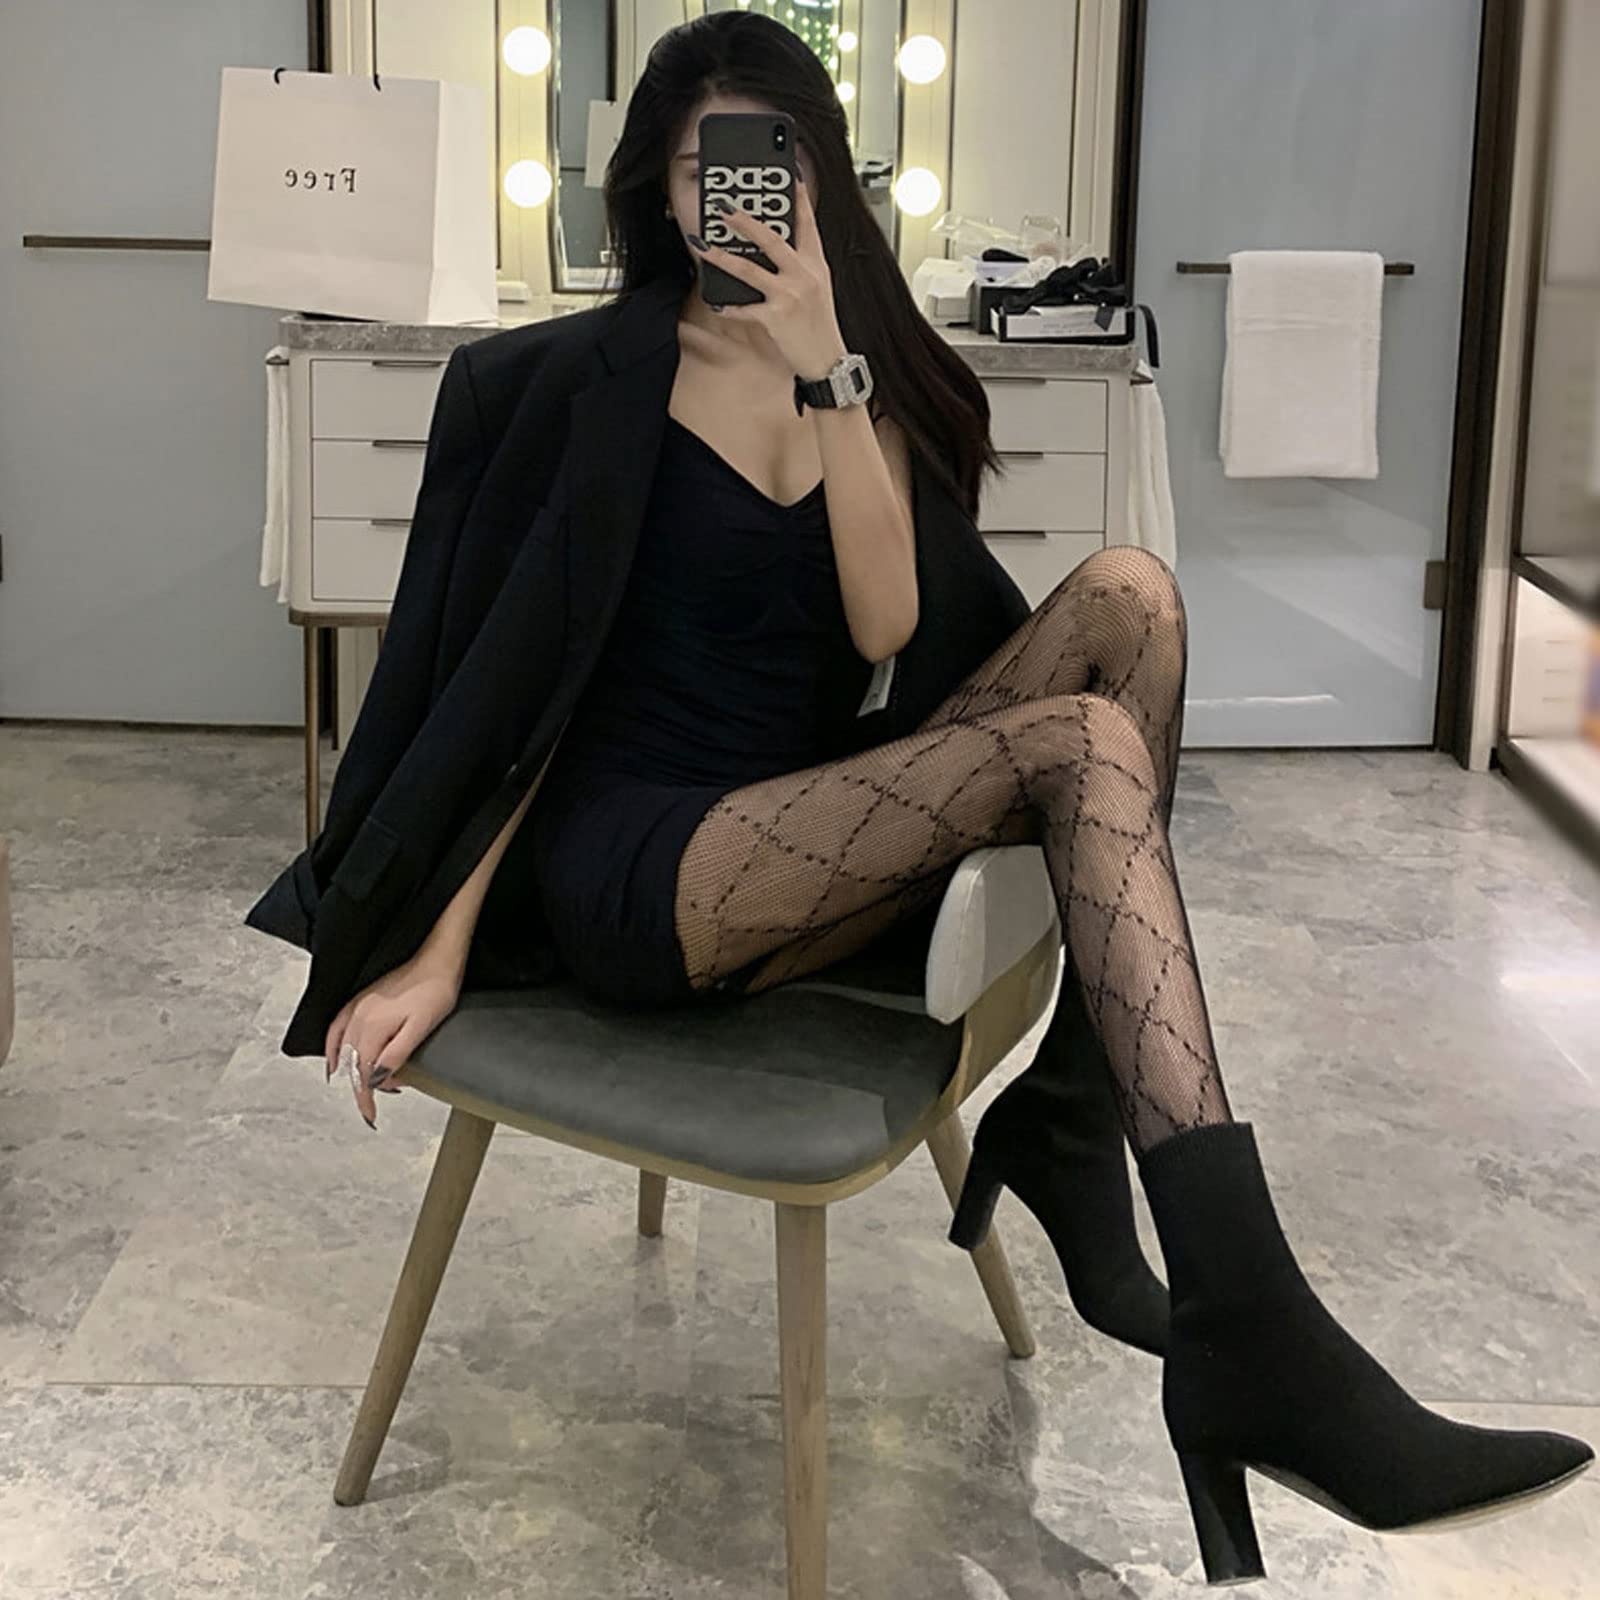 Echpzed Women Patterend Fishnet Tights High Waist Fashion Stockings Pantyhose for Party, 2 Pairs